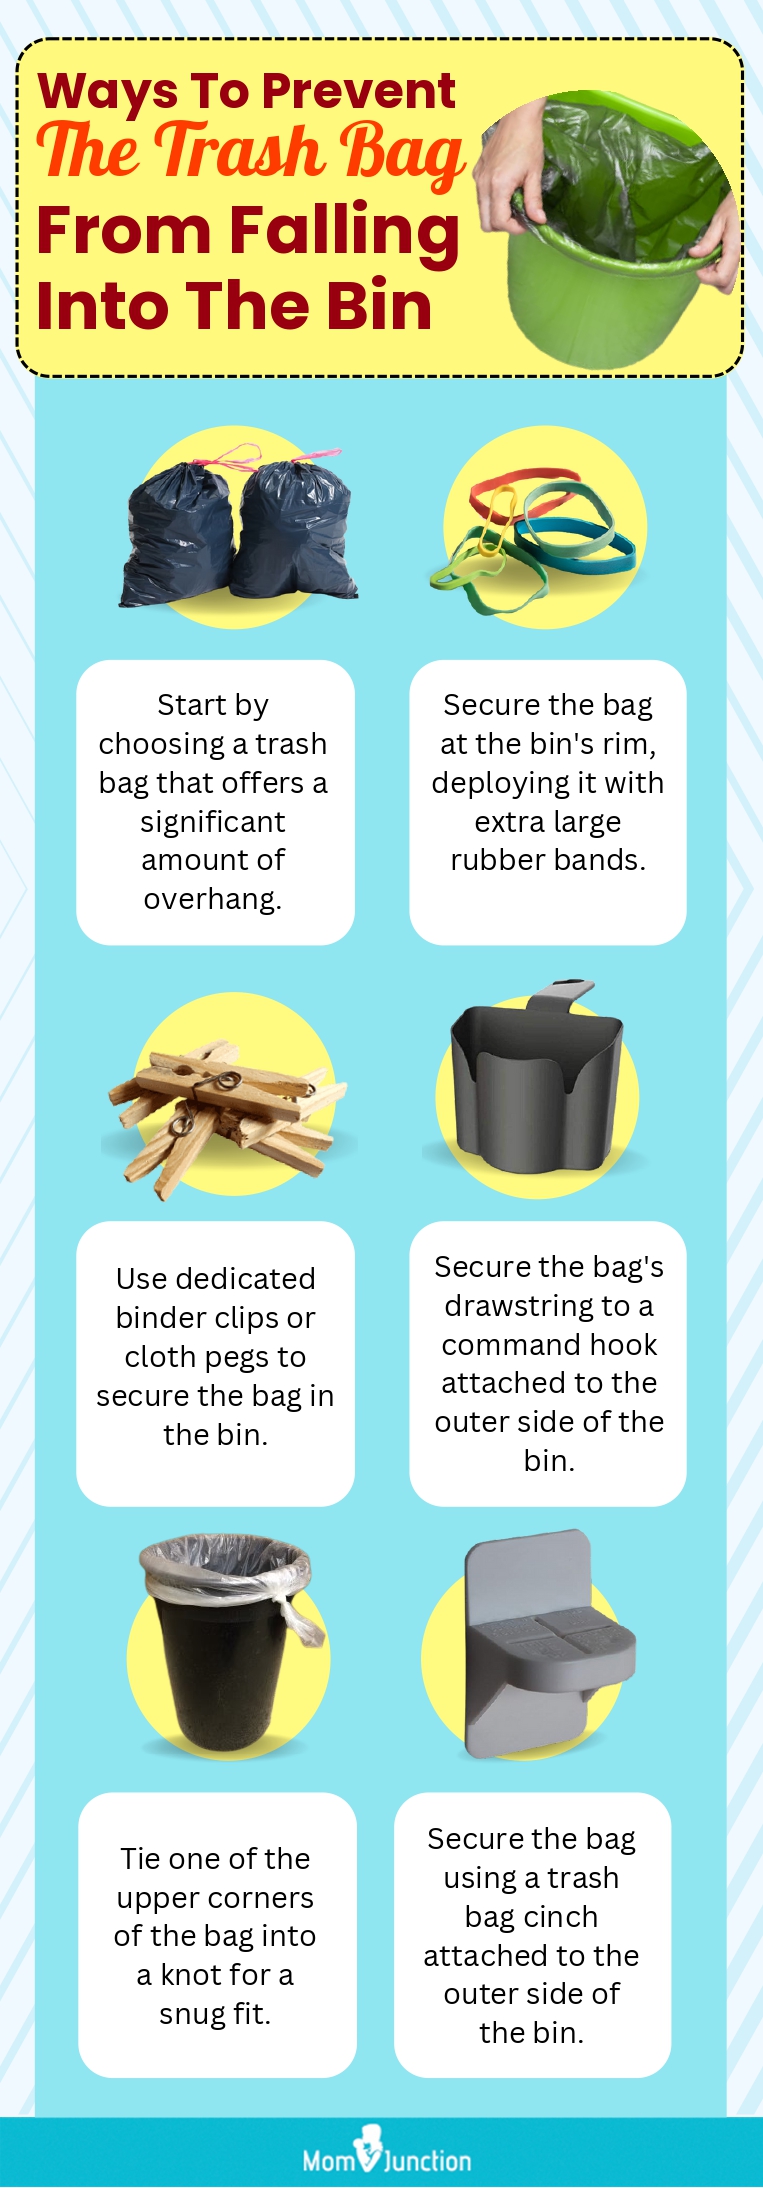 Ways To Prevent The Trash Bag From Falling Into The Bin (infographic)